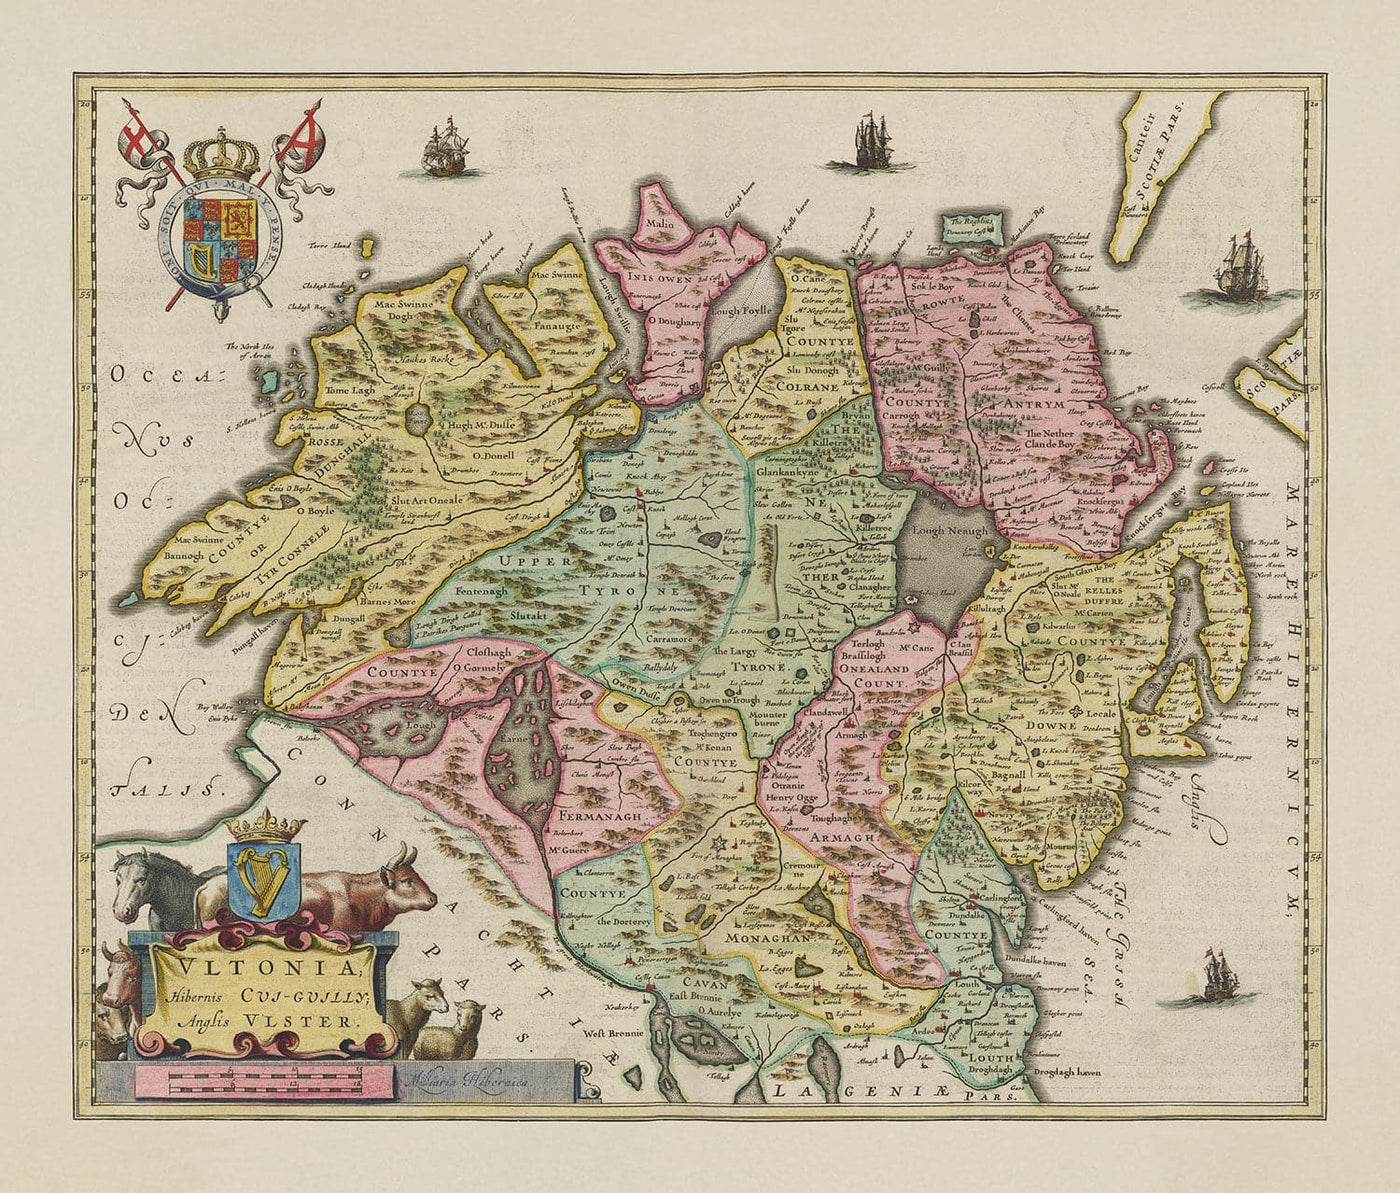 Old Map of Ulster, Northern Ireland in 1665 by Joan Blaeu - Belfast, Derry, County Antrim & Down, Eire